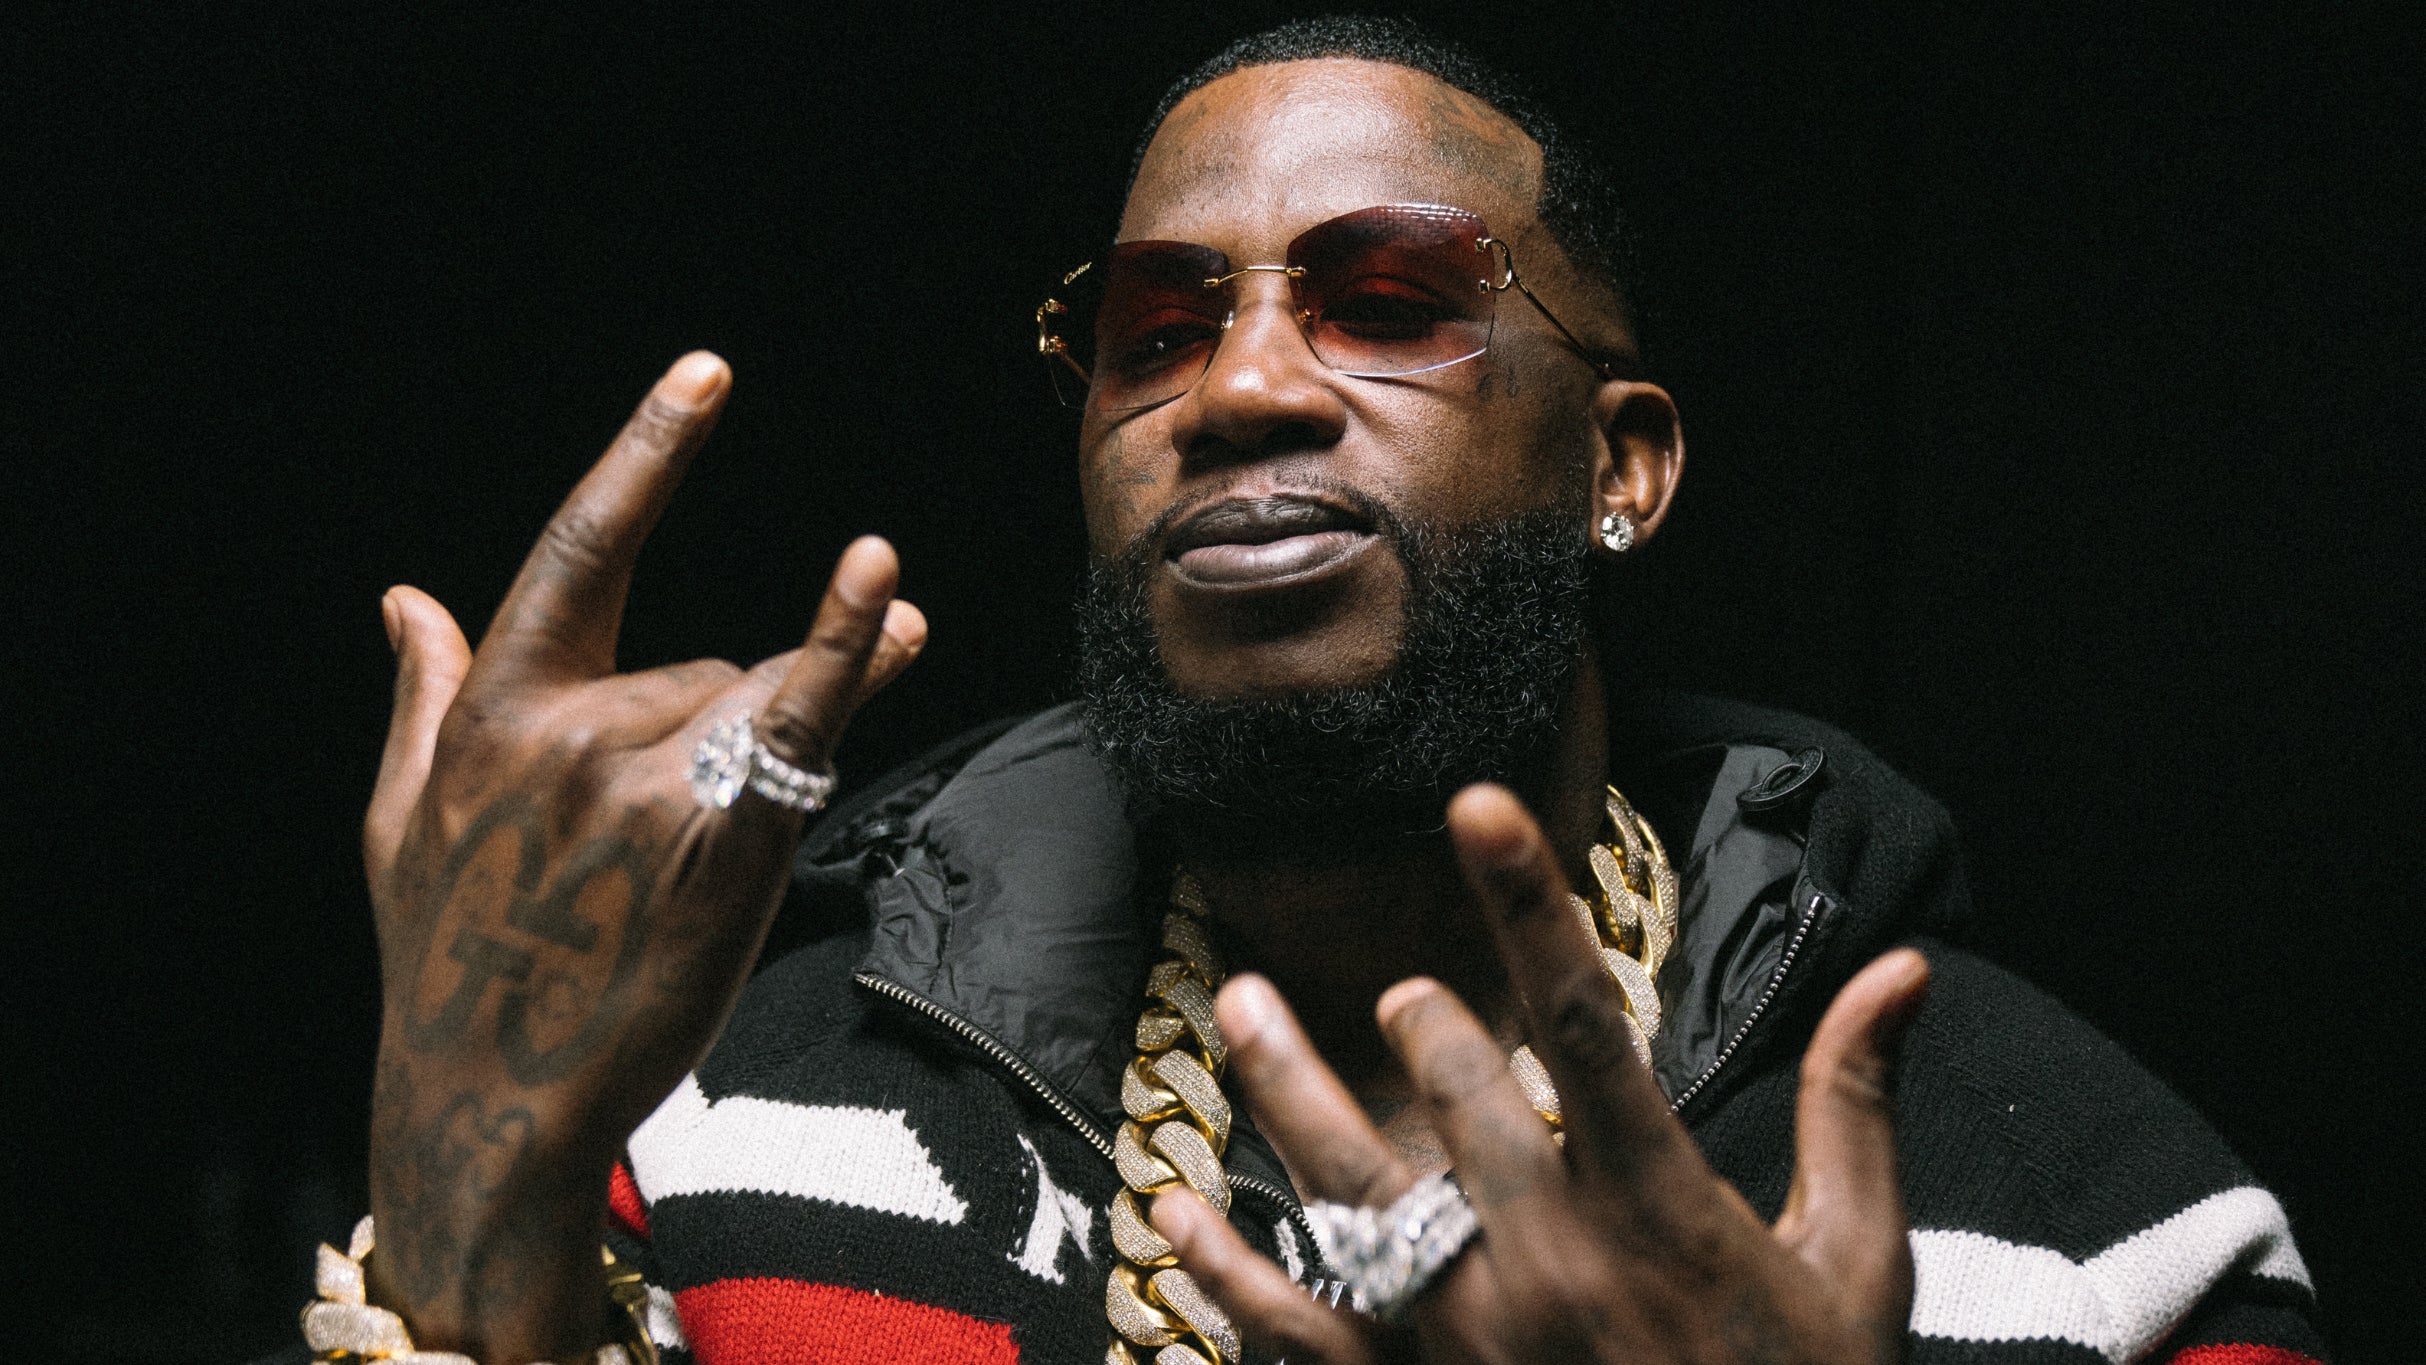 Gucci Mane & Friends presale code for approved tickets in Atlanta